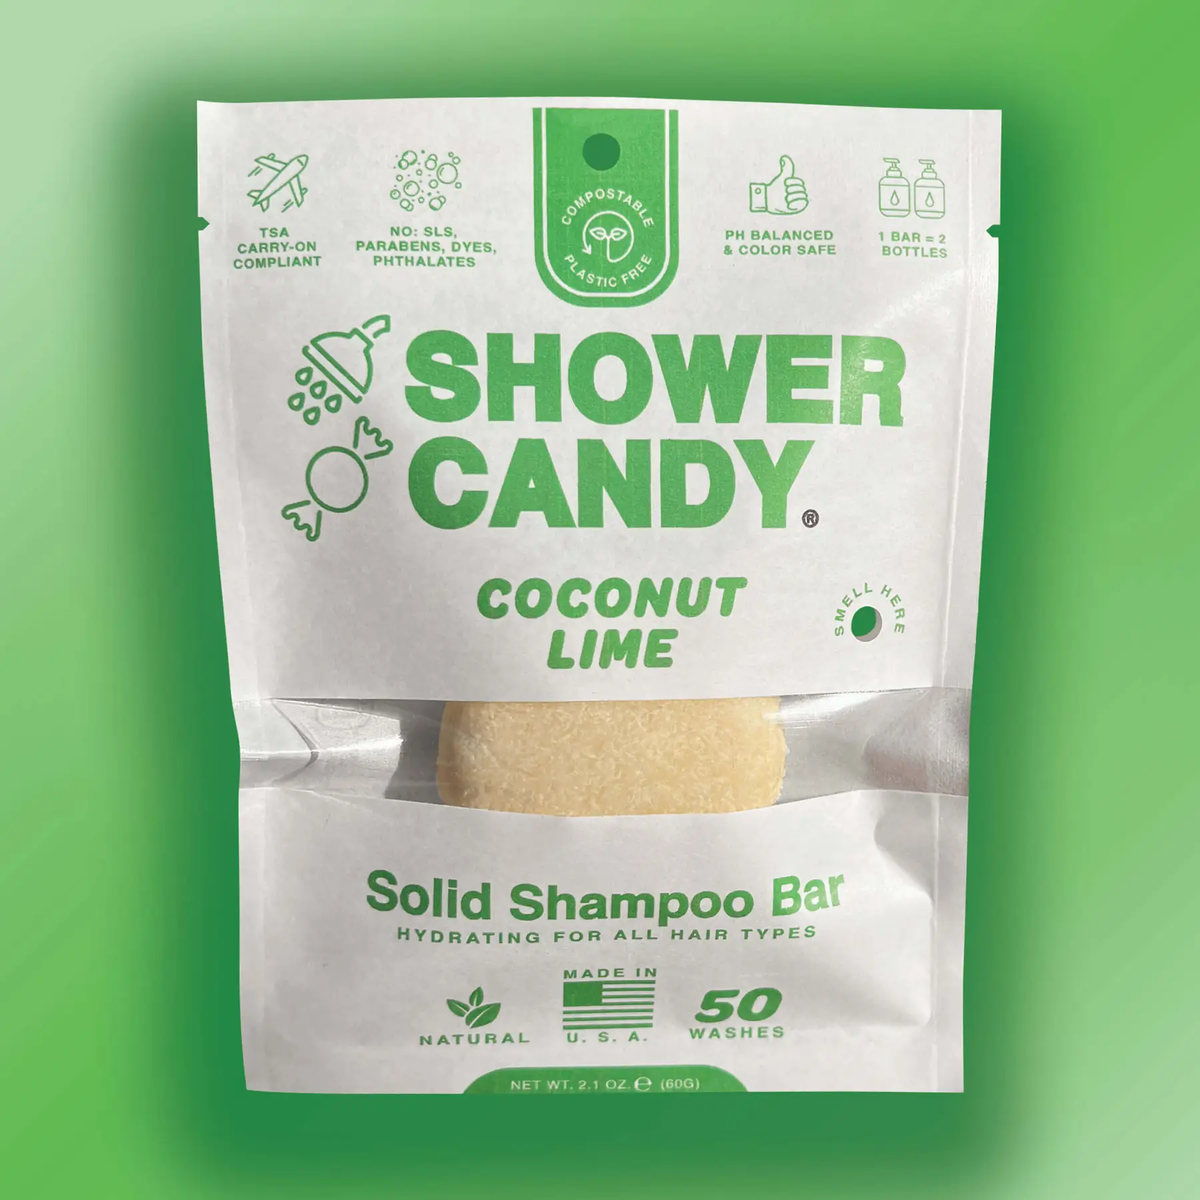 Shower Candy - Coconut Lime Solid Shampoo Bar